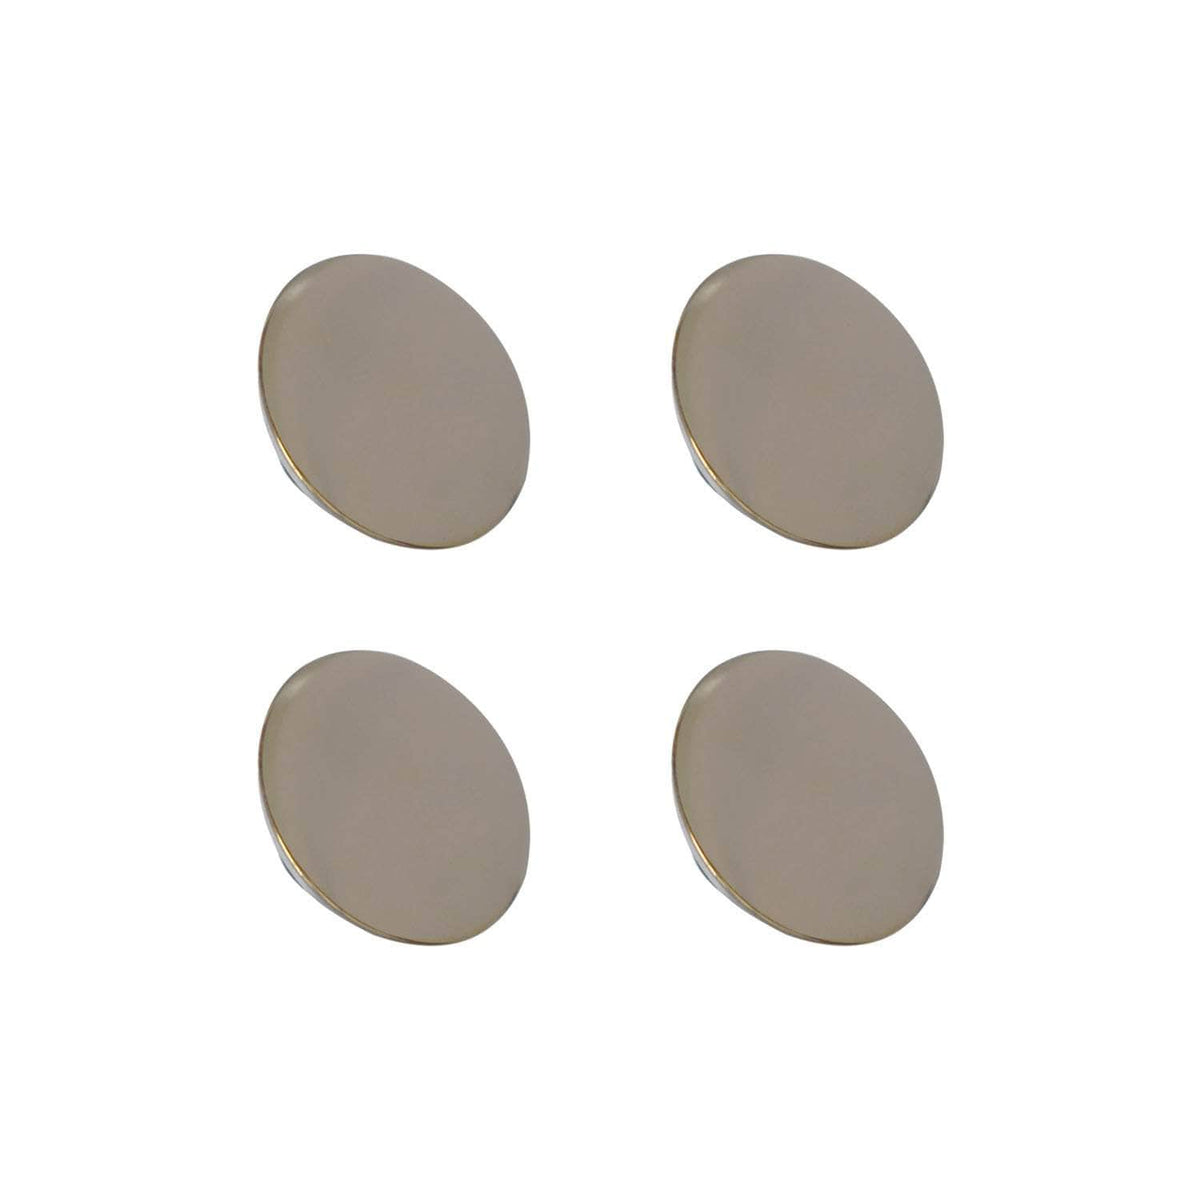 Chrome hob caps/buttons for use with Aga range cookers &#39;Deluxe&#39; Aga range cooker. 20mm. Set of 4